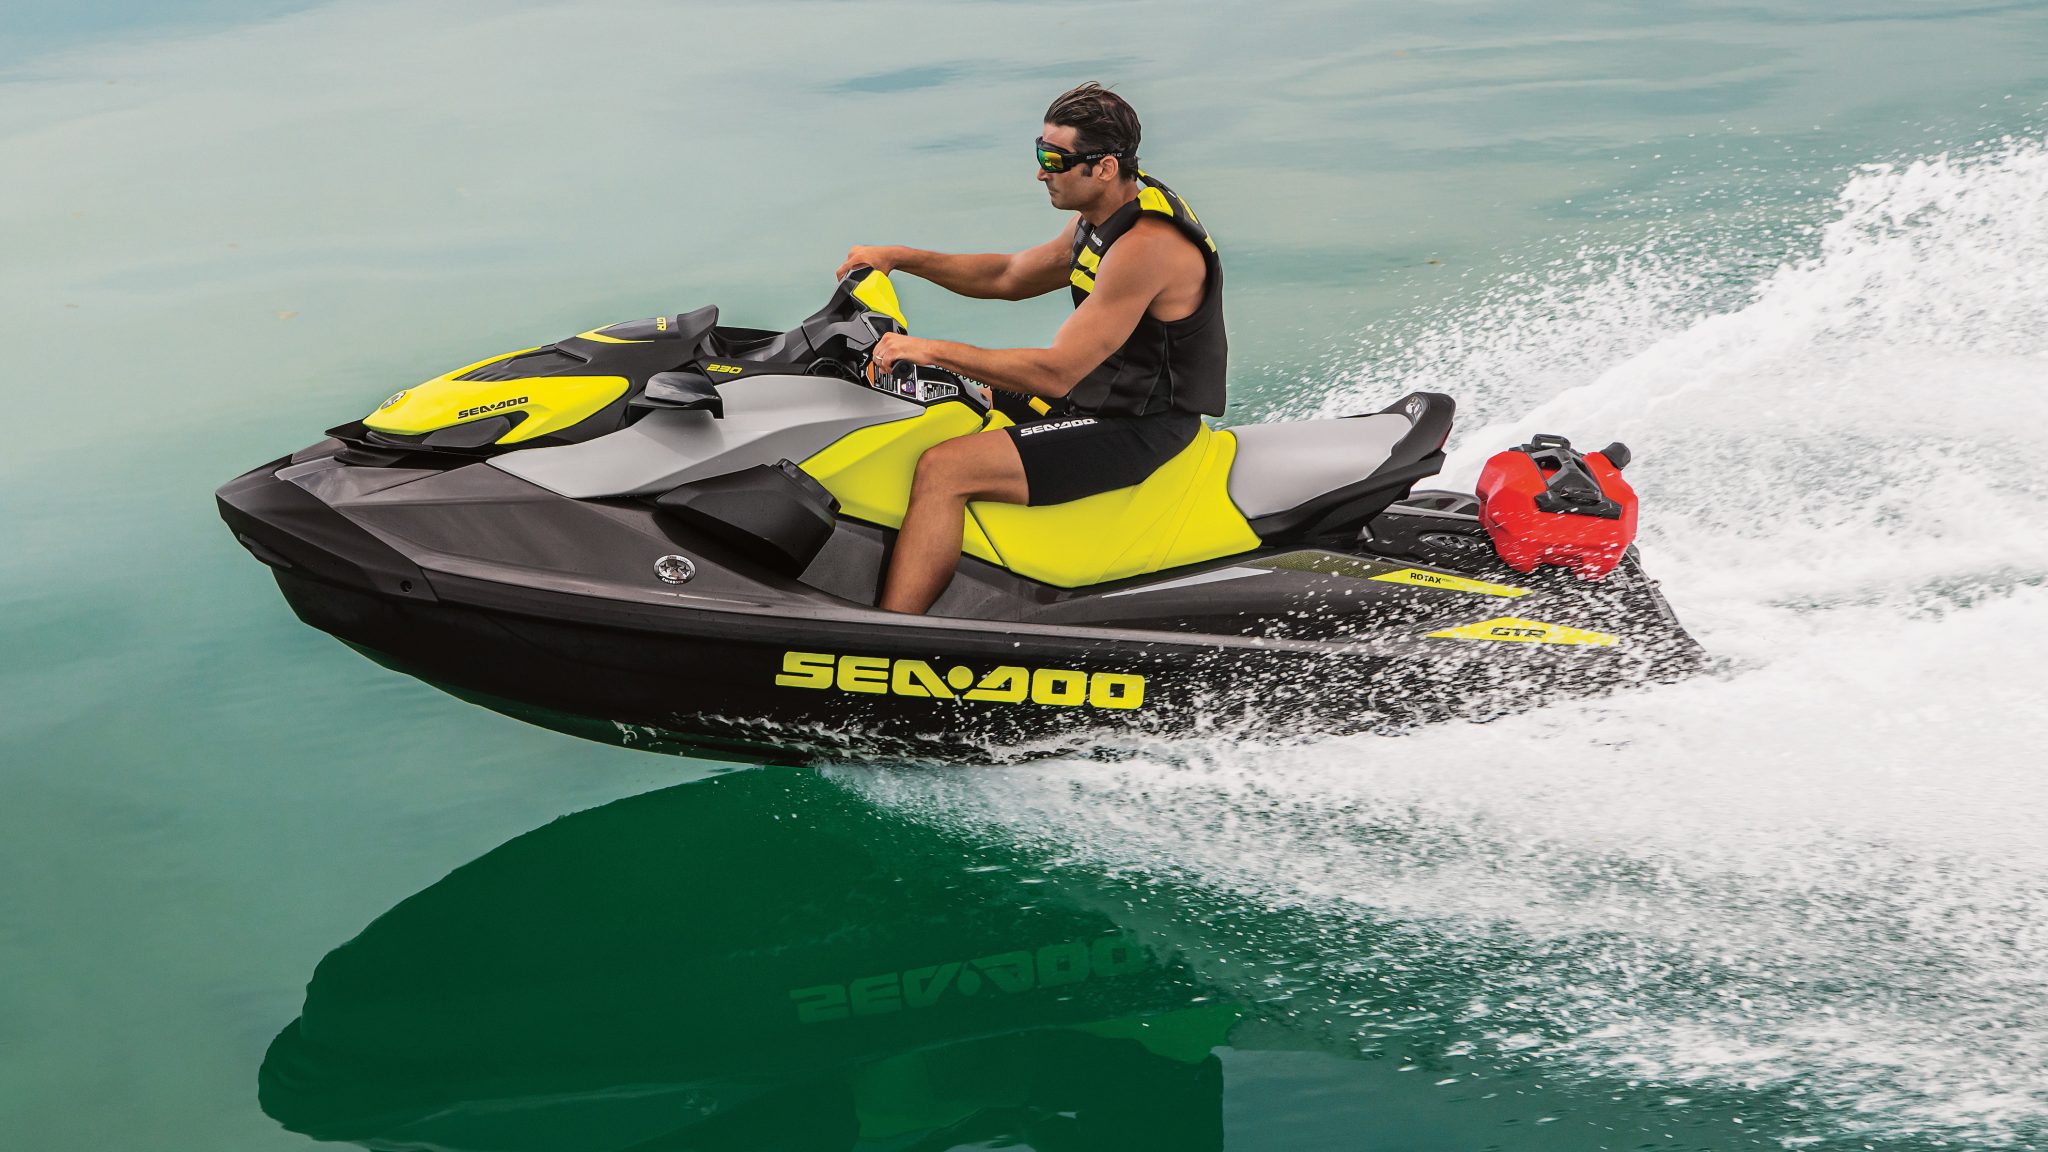 2022 SeaDoo prices and model changes